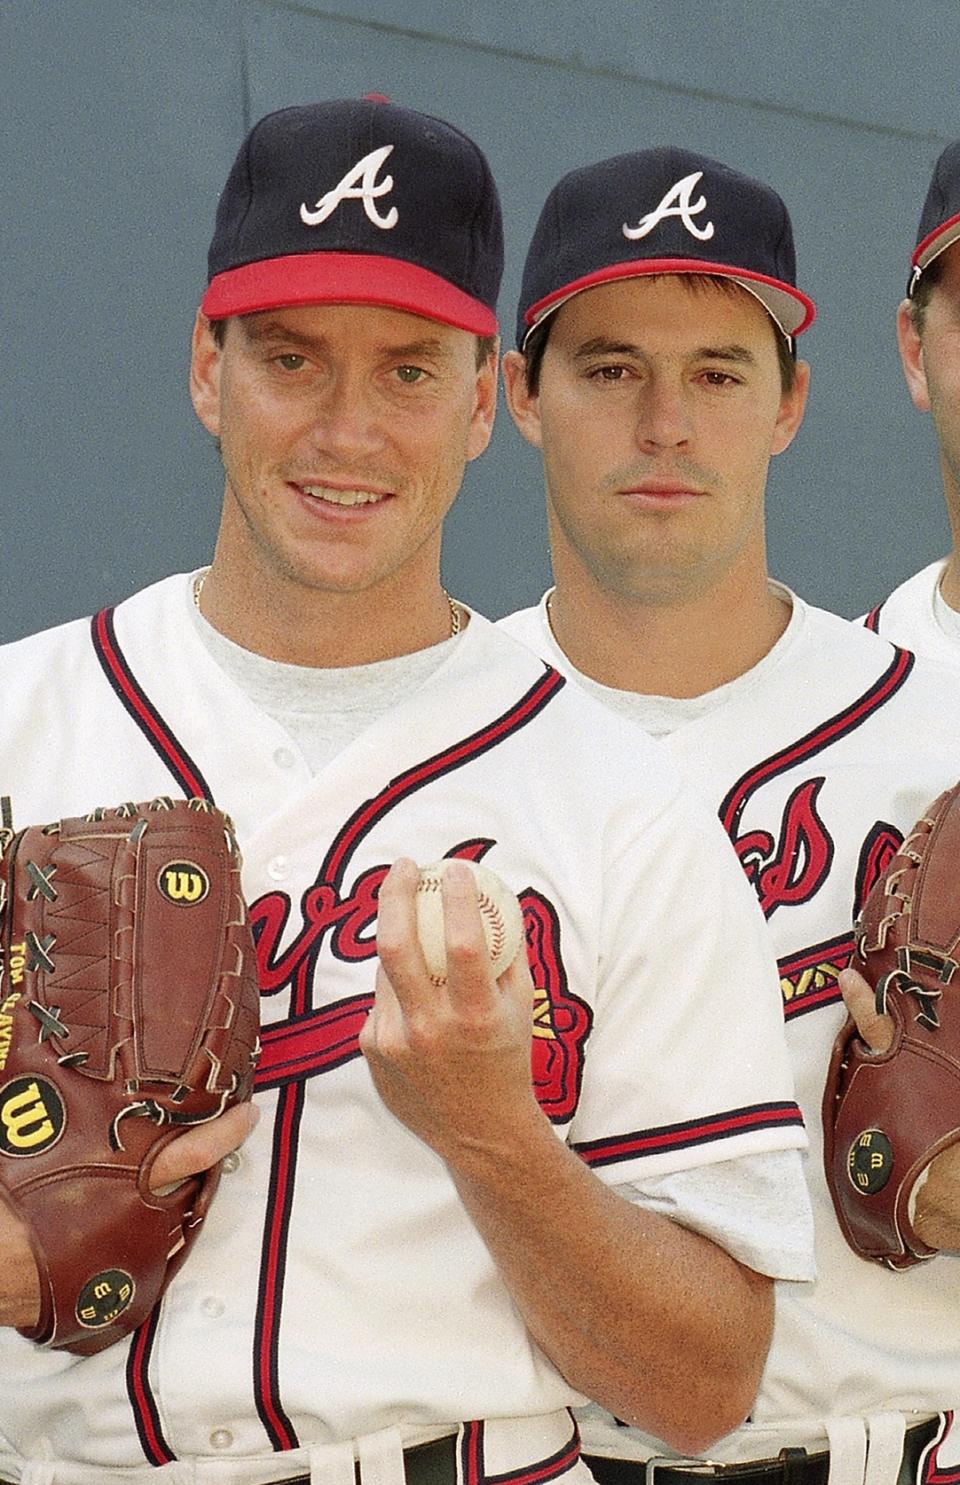 FILE - This March, 1993 file photo shows Atlanta Braves pitchers Tom Glavine, left, and Greg Maddux. Glavine and Maddux were elected to the Baseball Hall of Fame, Wednesday, Jan. 8, 2014. (AP Photo/Kathy Willens, File)